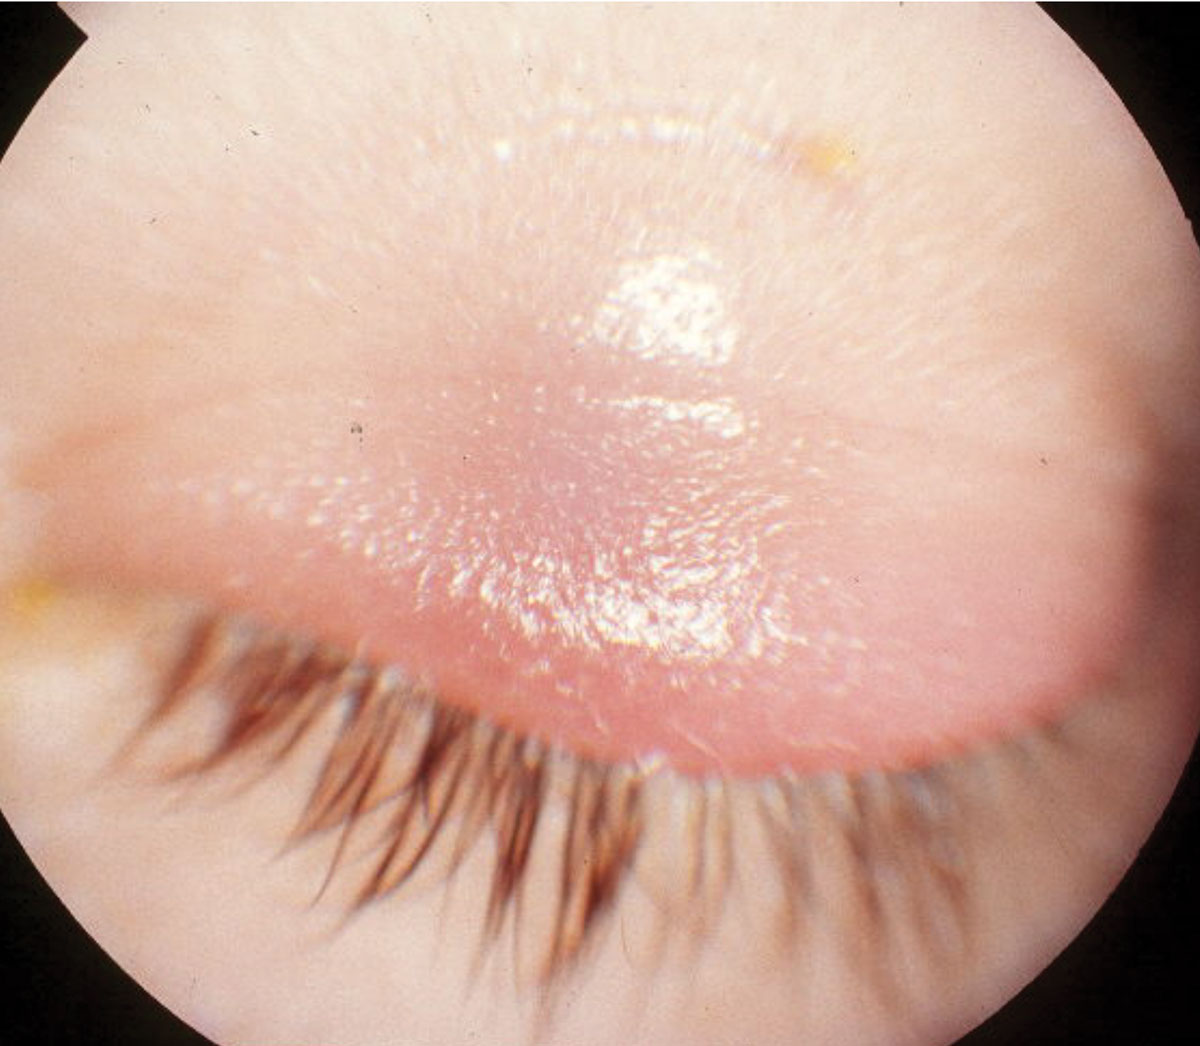 Fig. 4. This child had swelling of the upper eyelid in a case of preseptal cellulitis, which can generally be managed with broad- spectrum oral antibiotics.